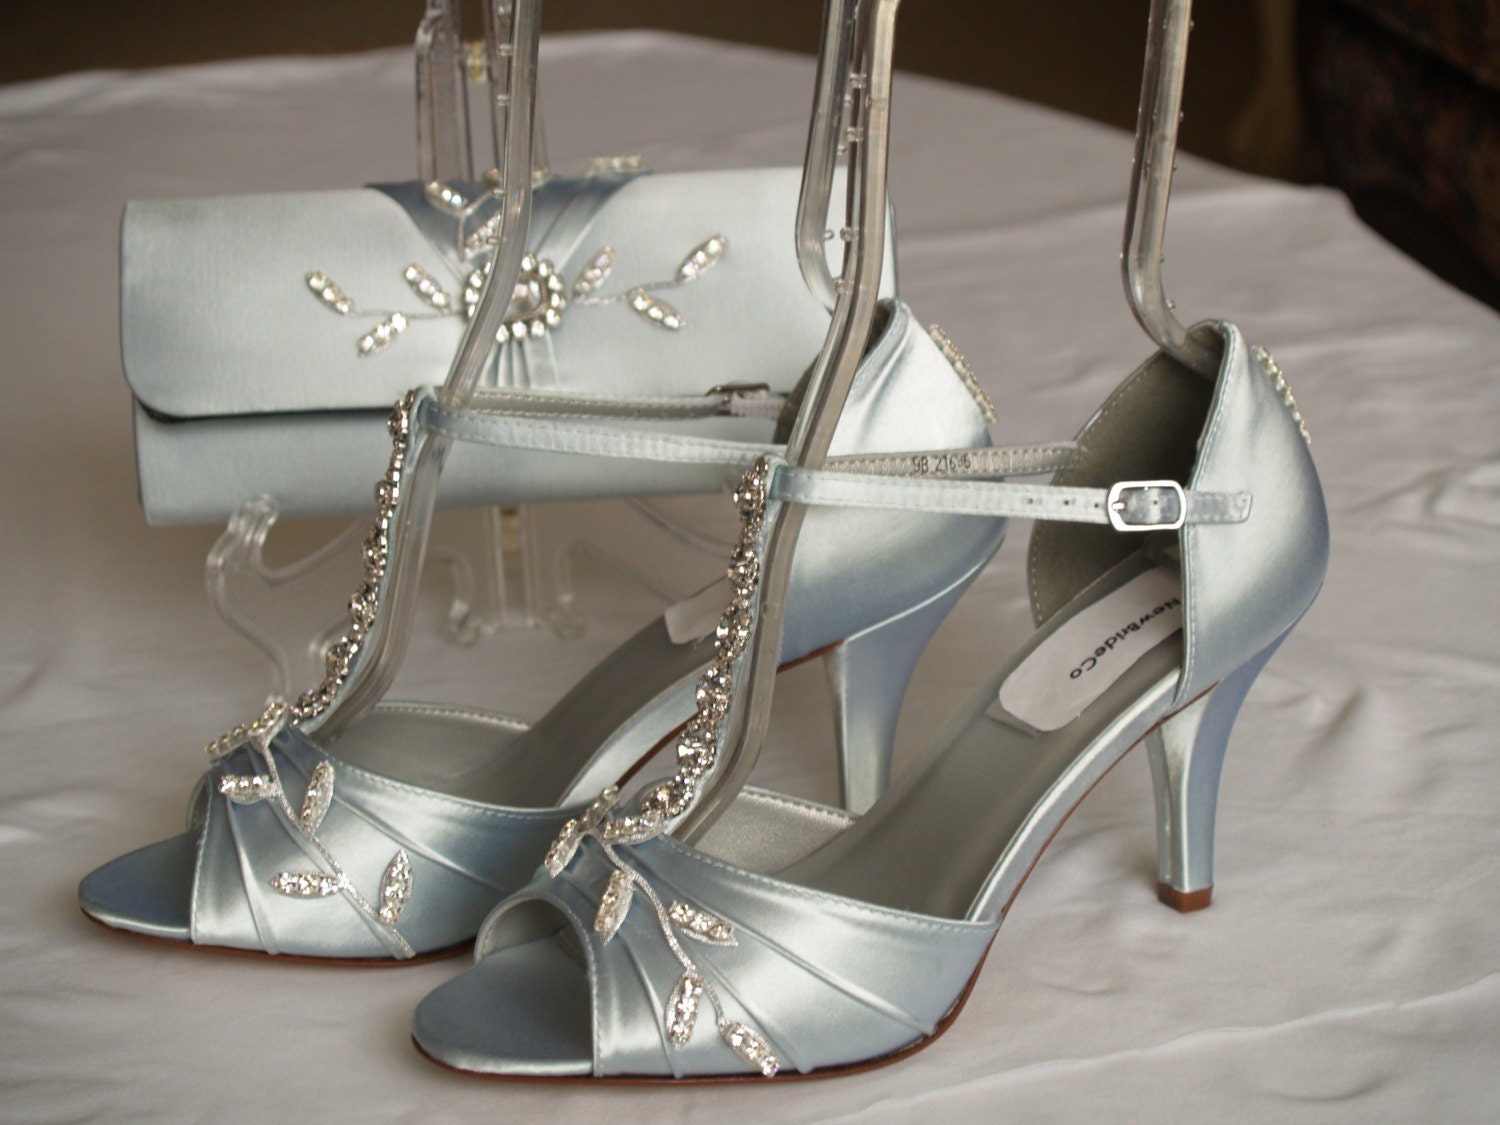 If Curves Could Talk: New Heels!: Speed Limit 98 Mealy Silver Glitter Peep  Toe Platform